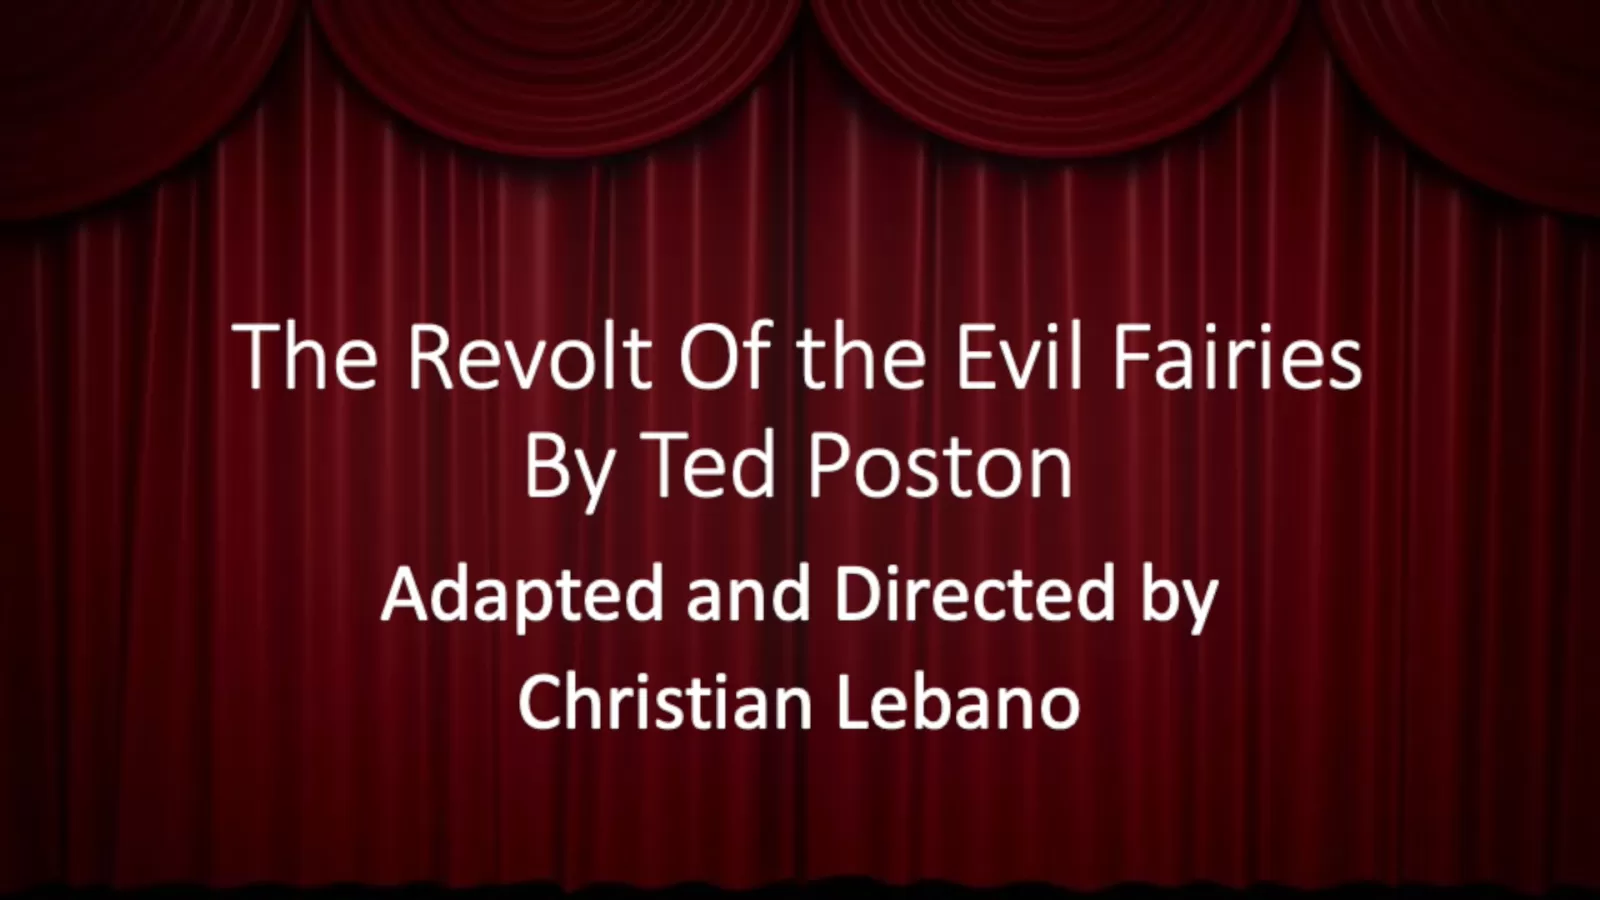 "The Revolt of the Evil Fairies" by Ted Poston